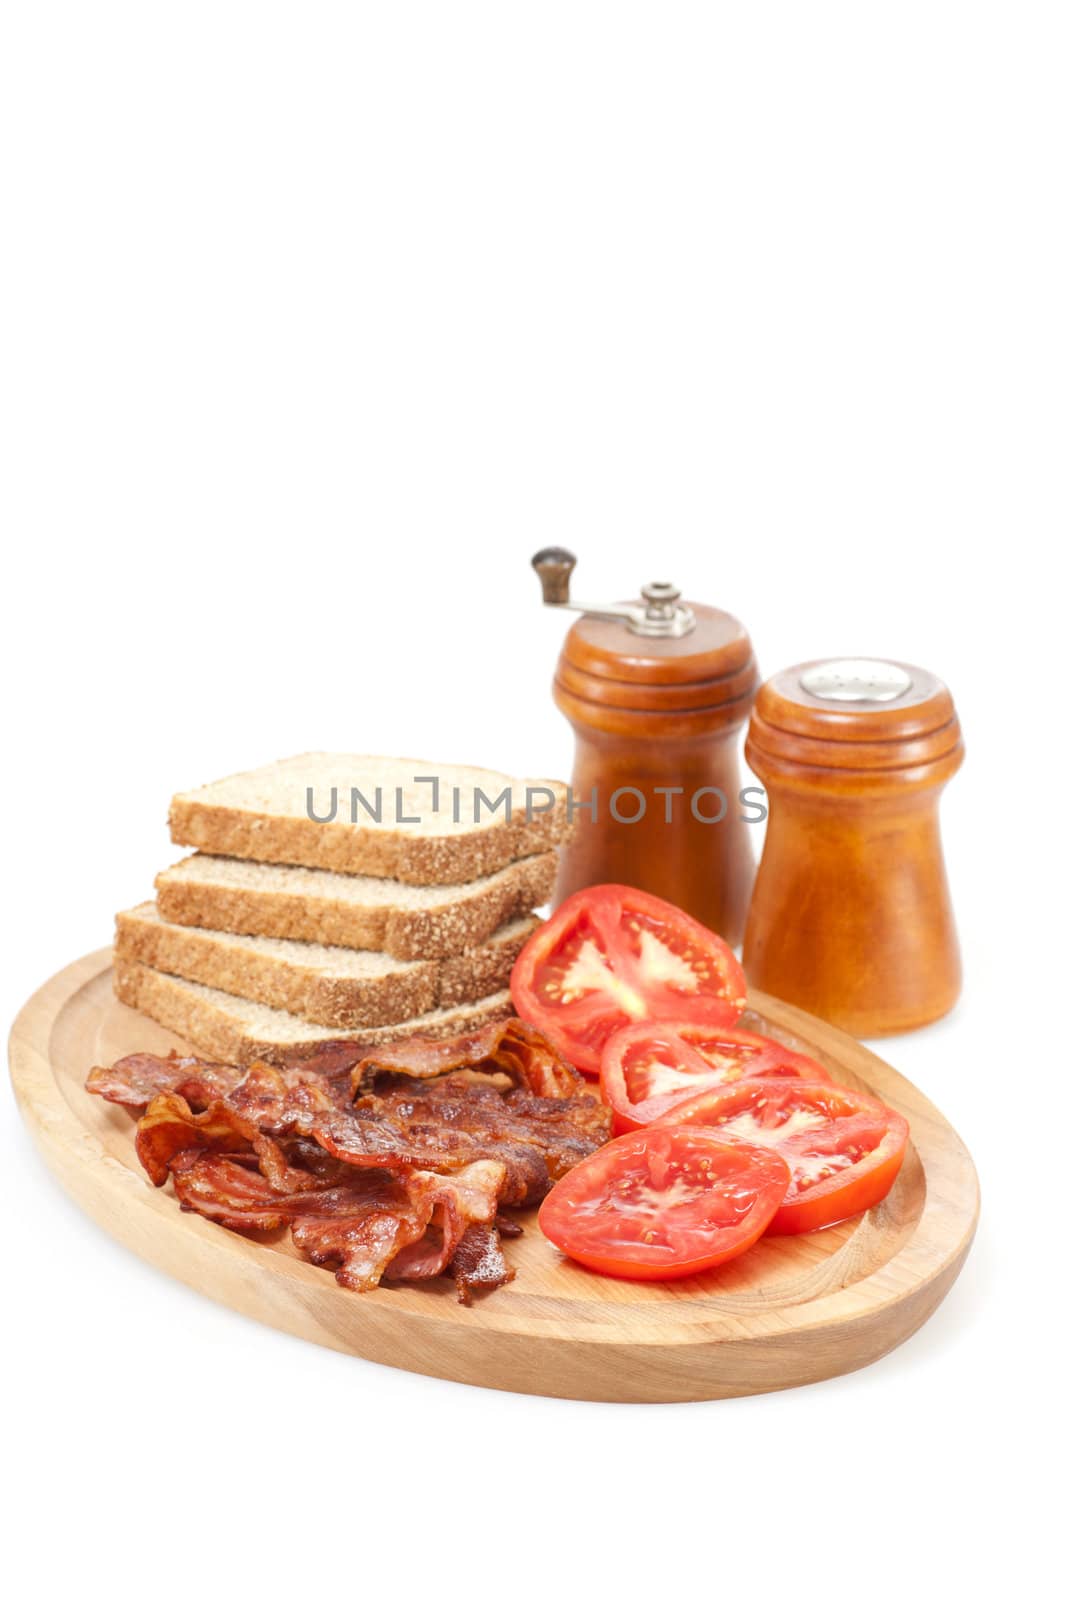 Bacon, Tomatoes and Bread by billberryphotography